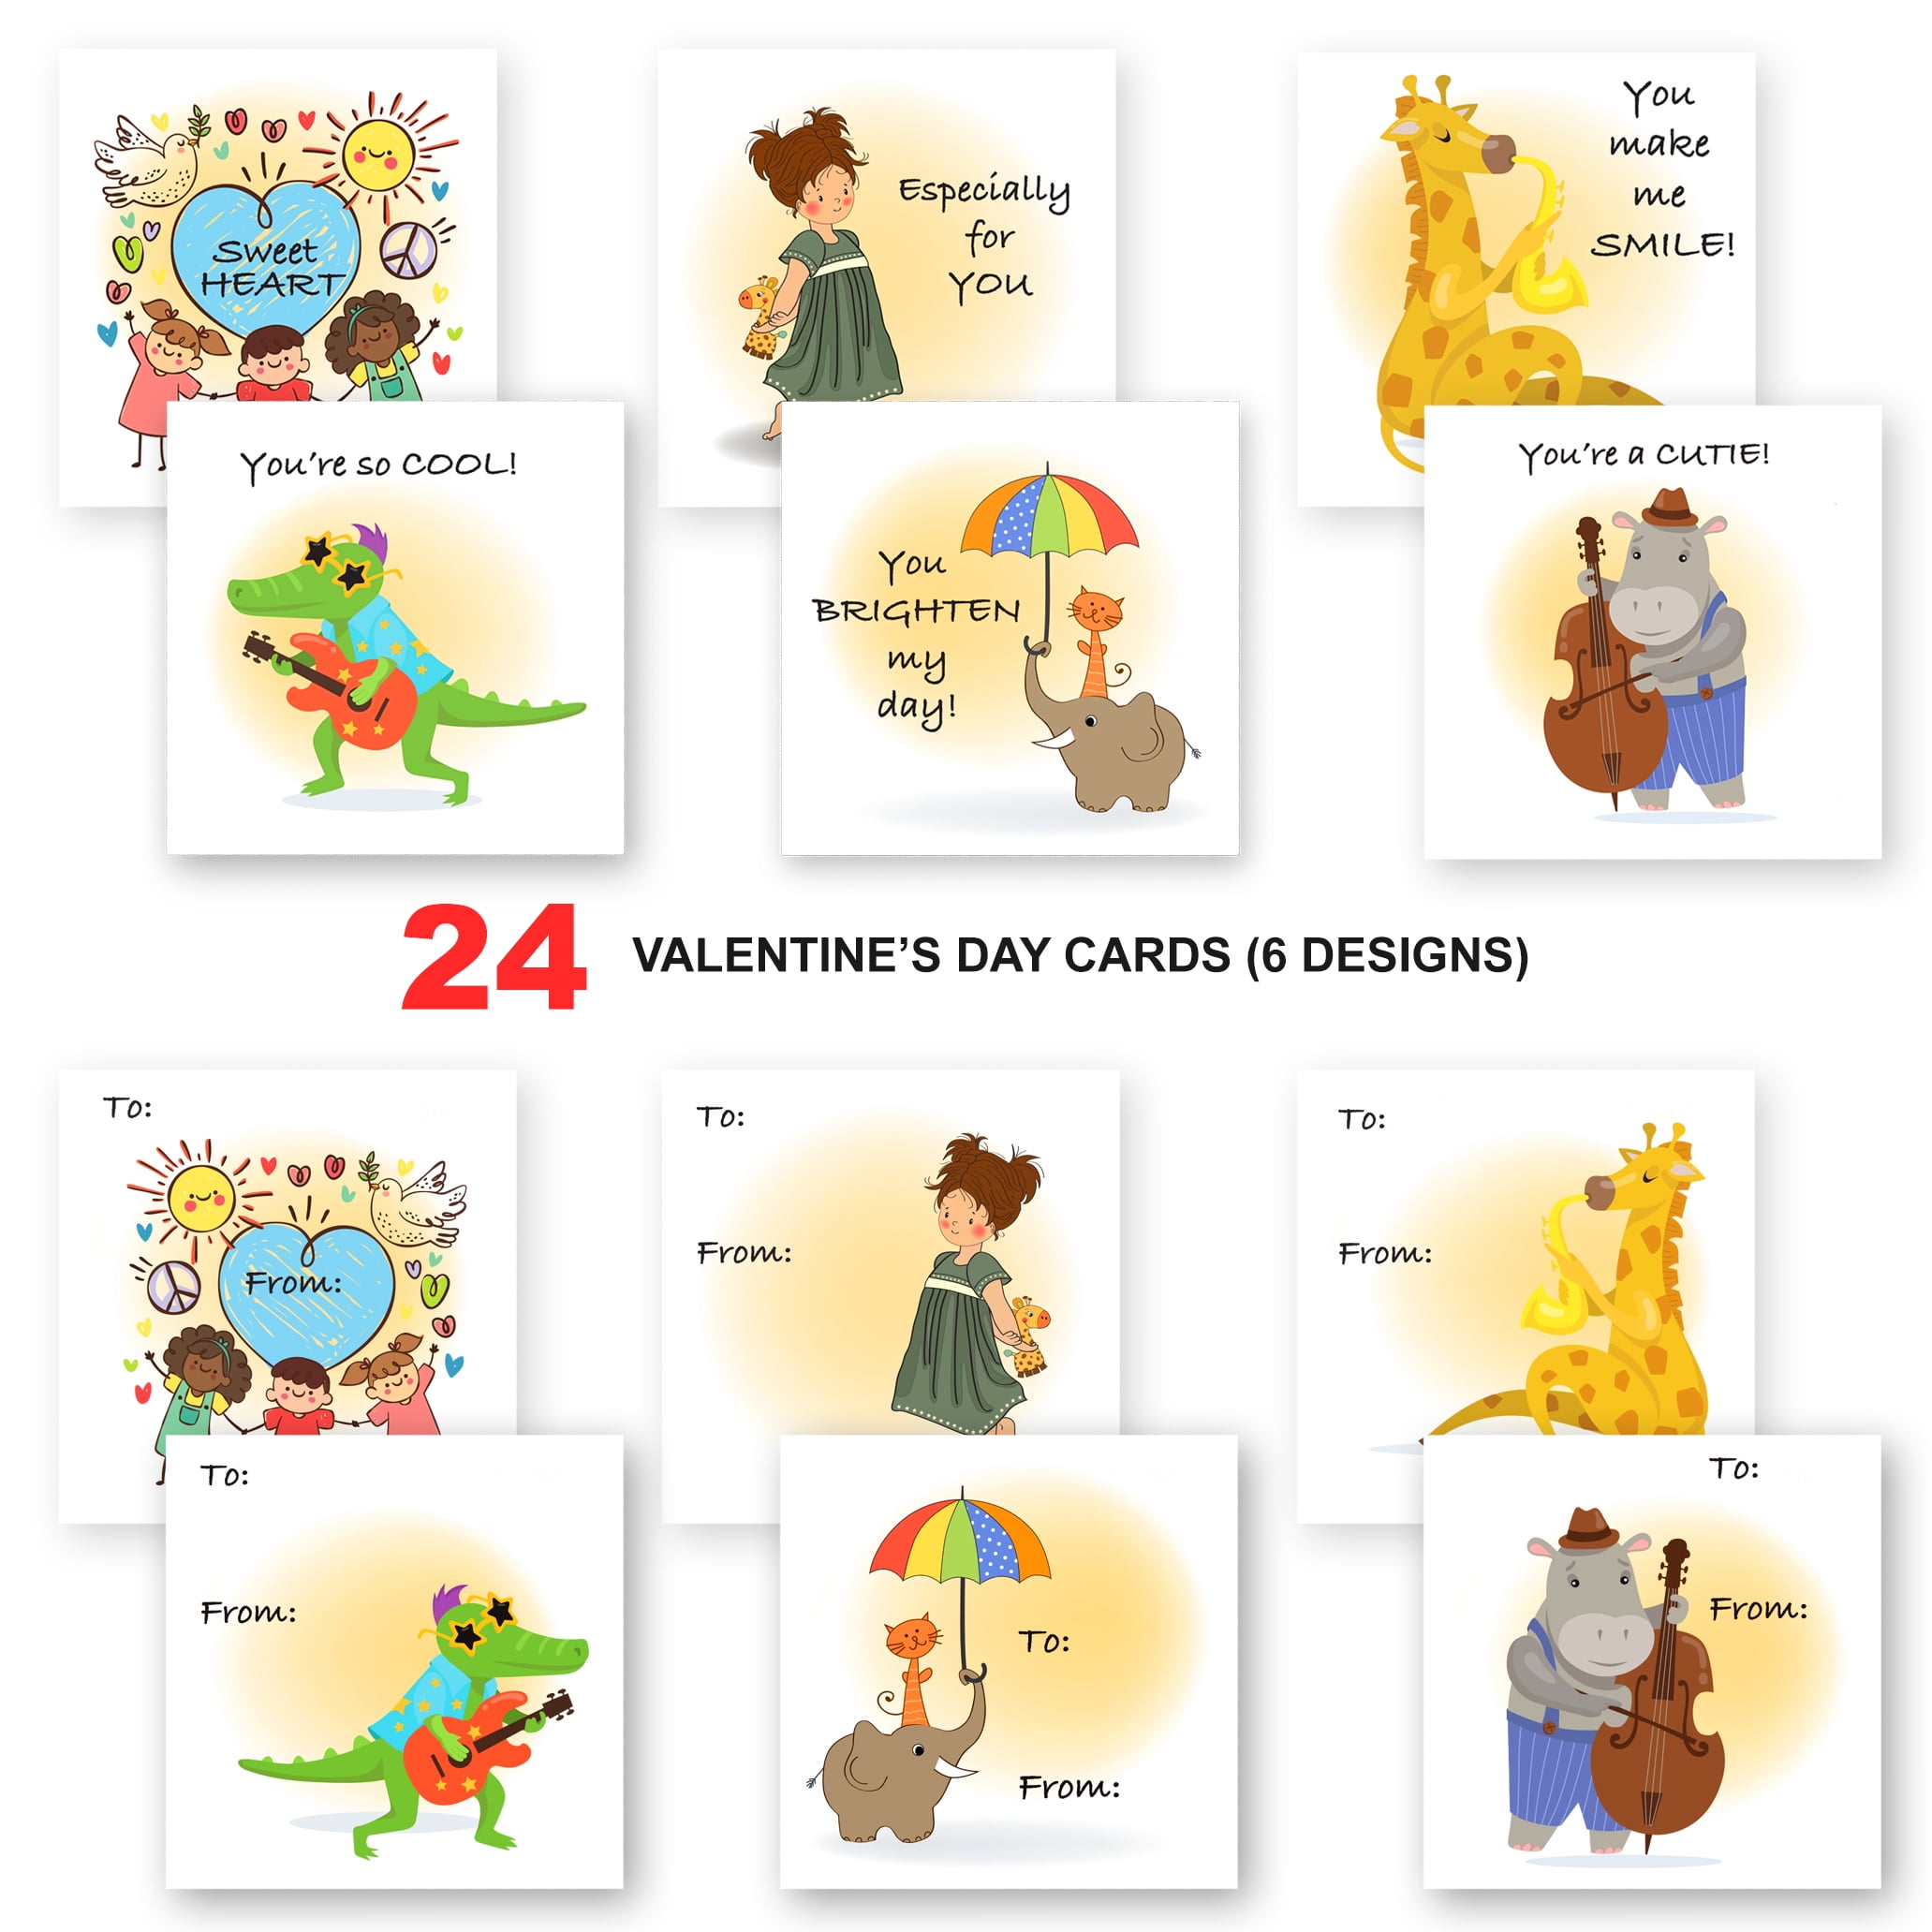 UAUOCU Valentines Day Gifts for Kids Classroom, 28 Valentine Cards Bulk for  School Class Prizes Party Favors Boys Girls Exchange Gift, Goodie Fillers